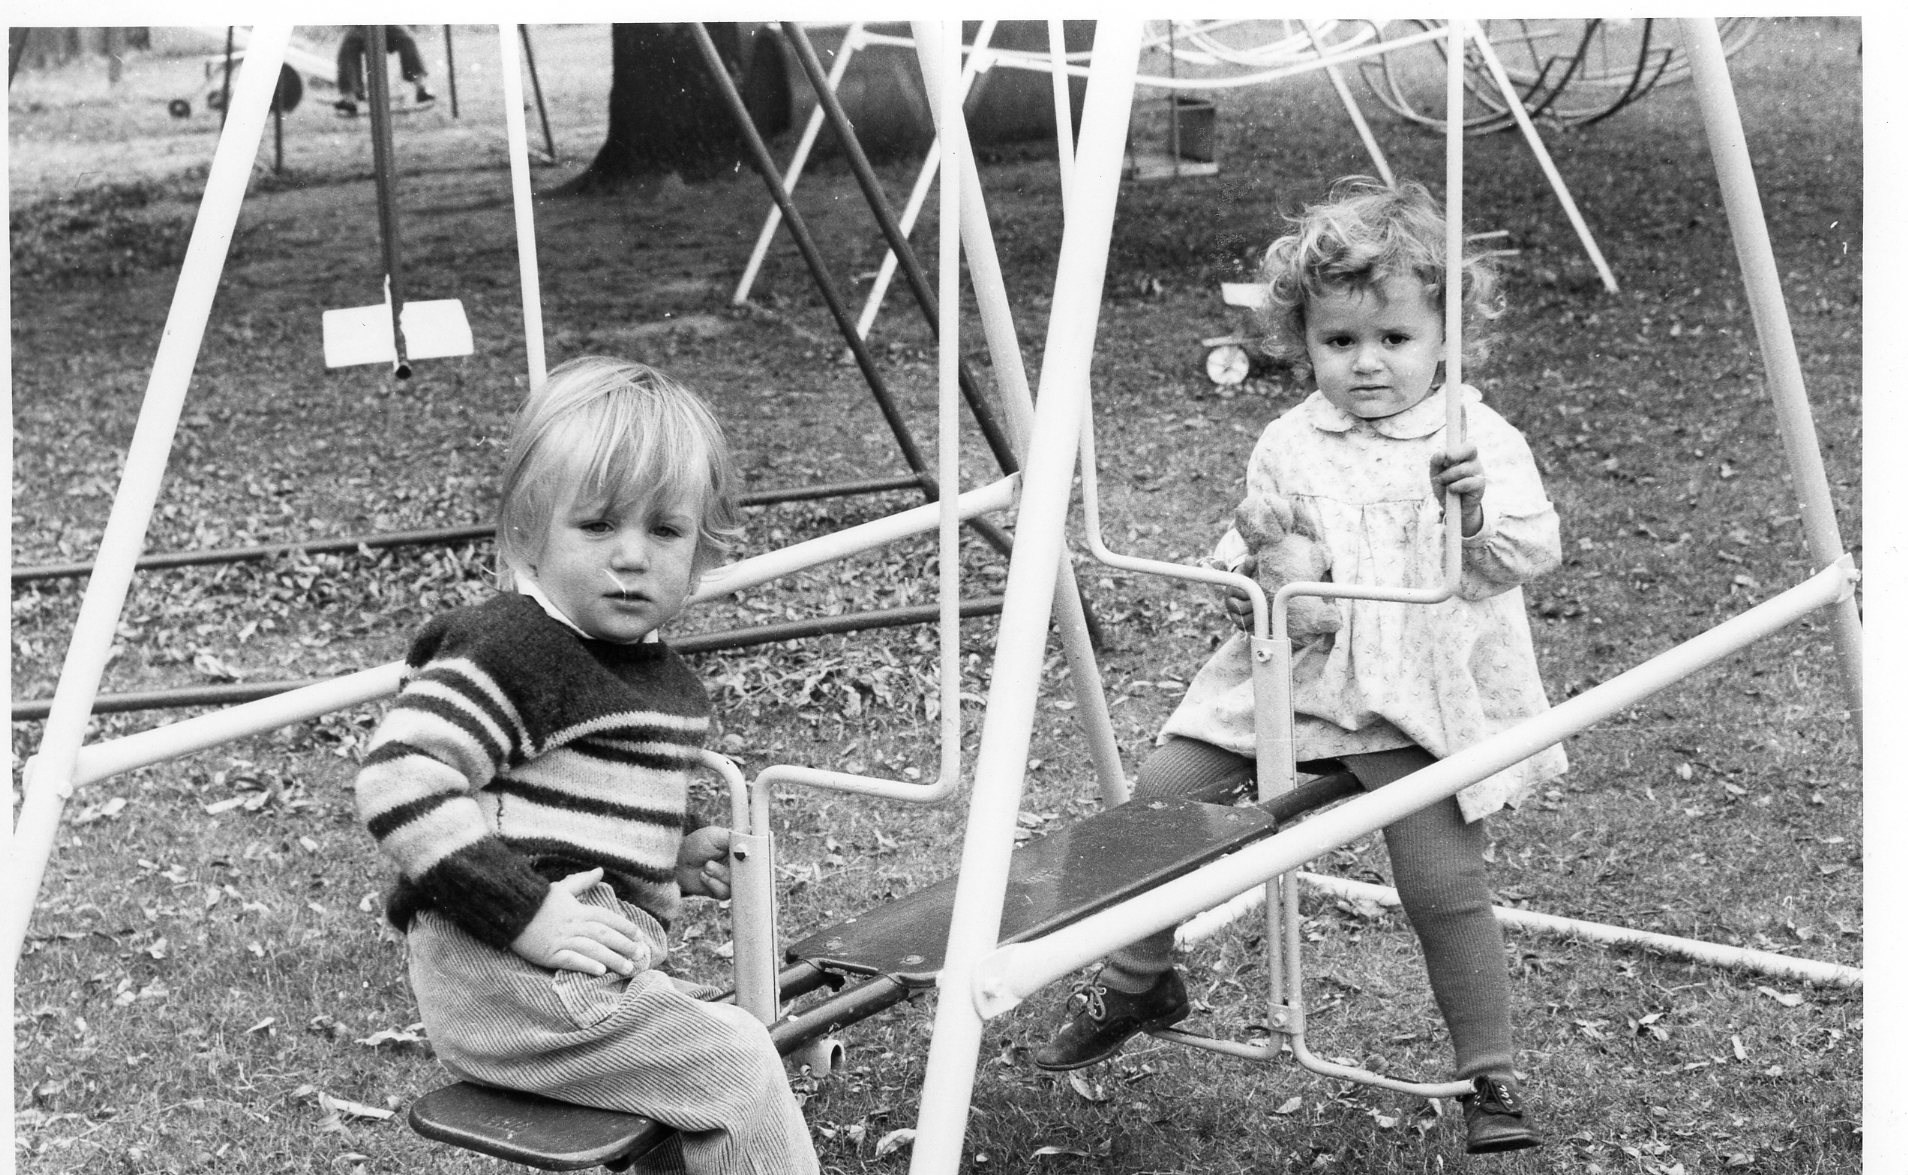 1977 - KC - Girl And Boy On Seesaw